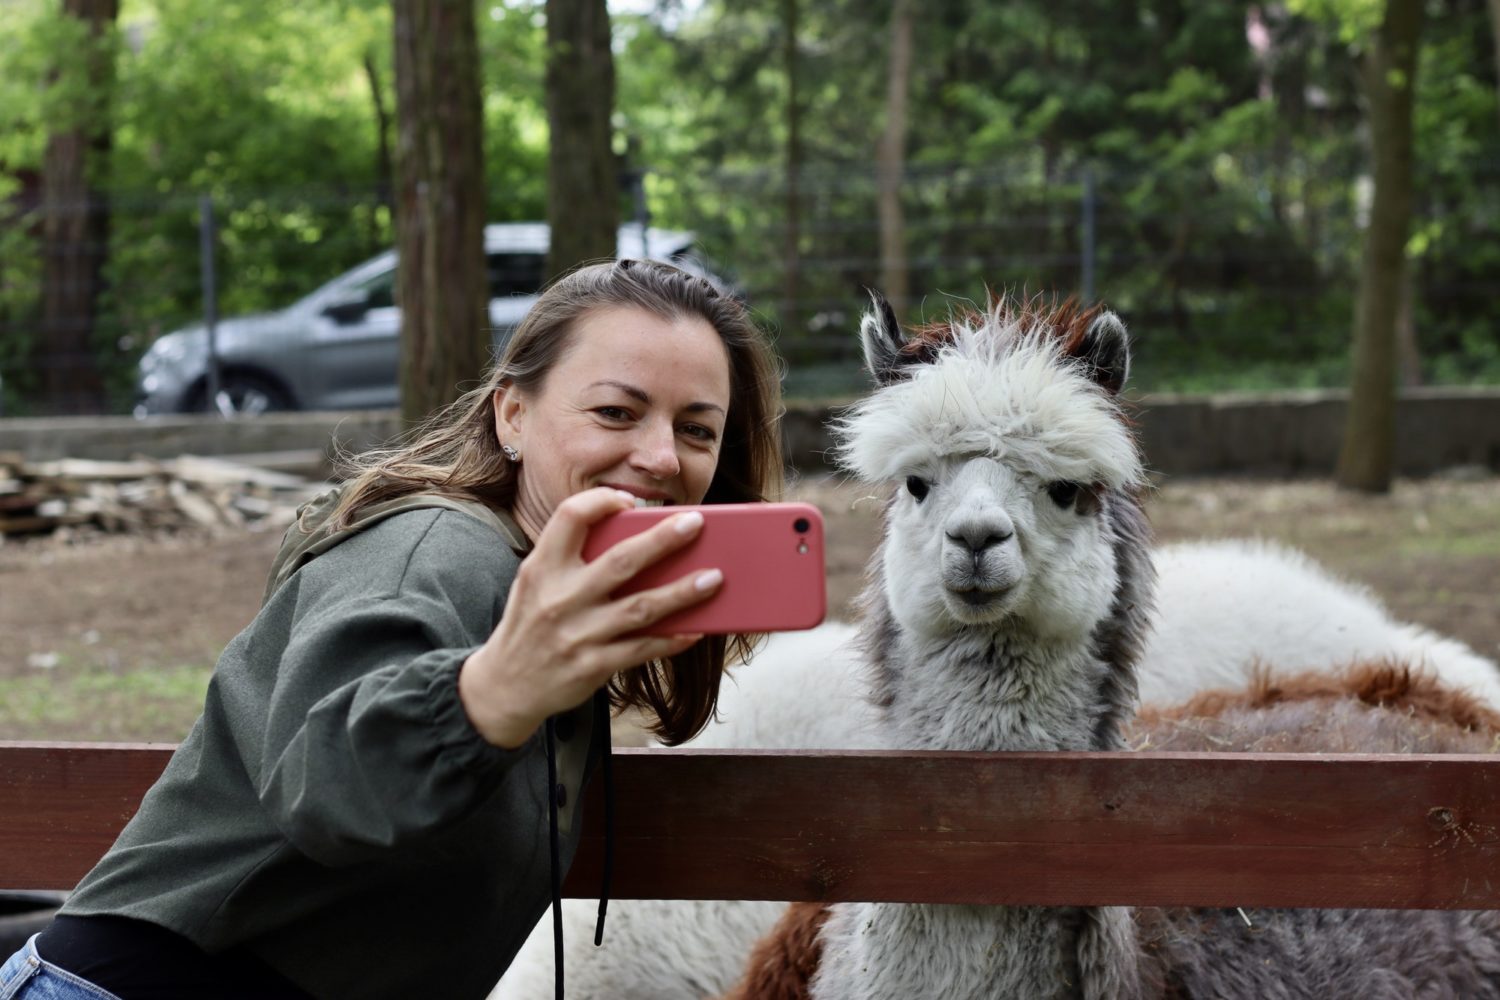 Woman doing selfie with Alpaca at the zoo.